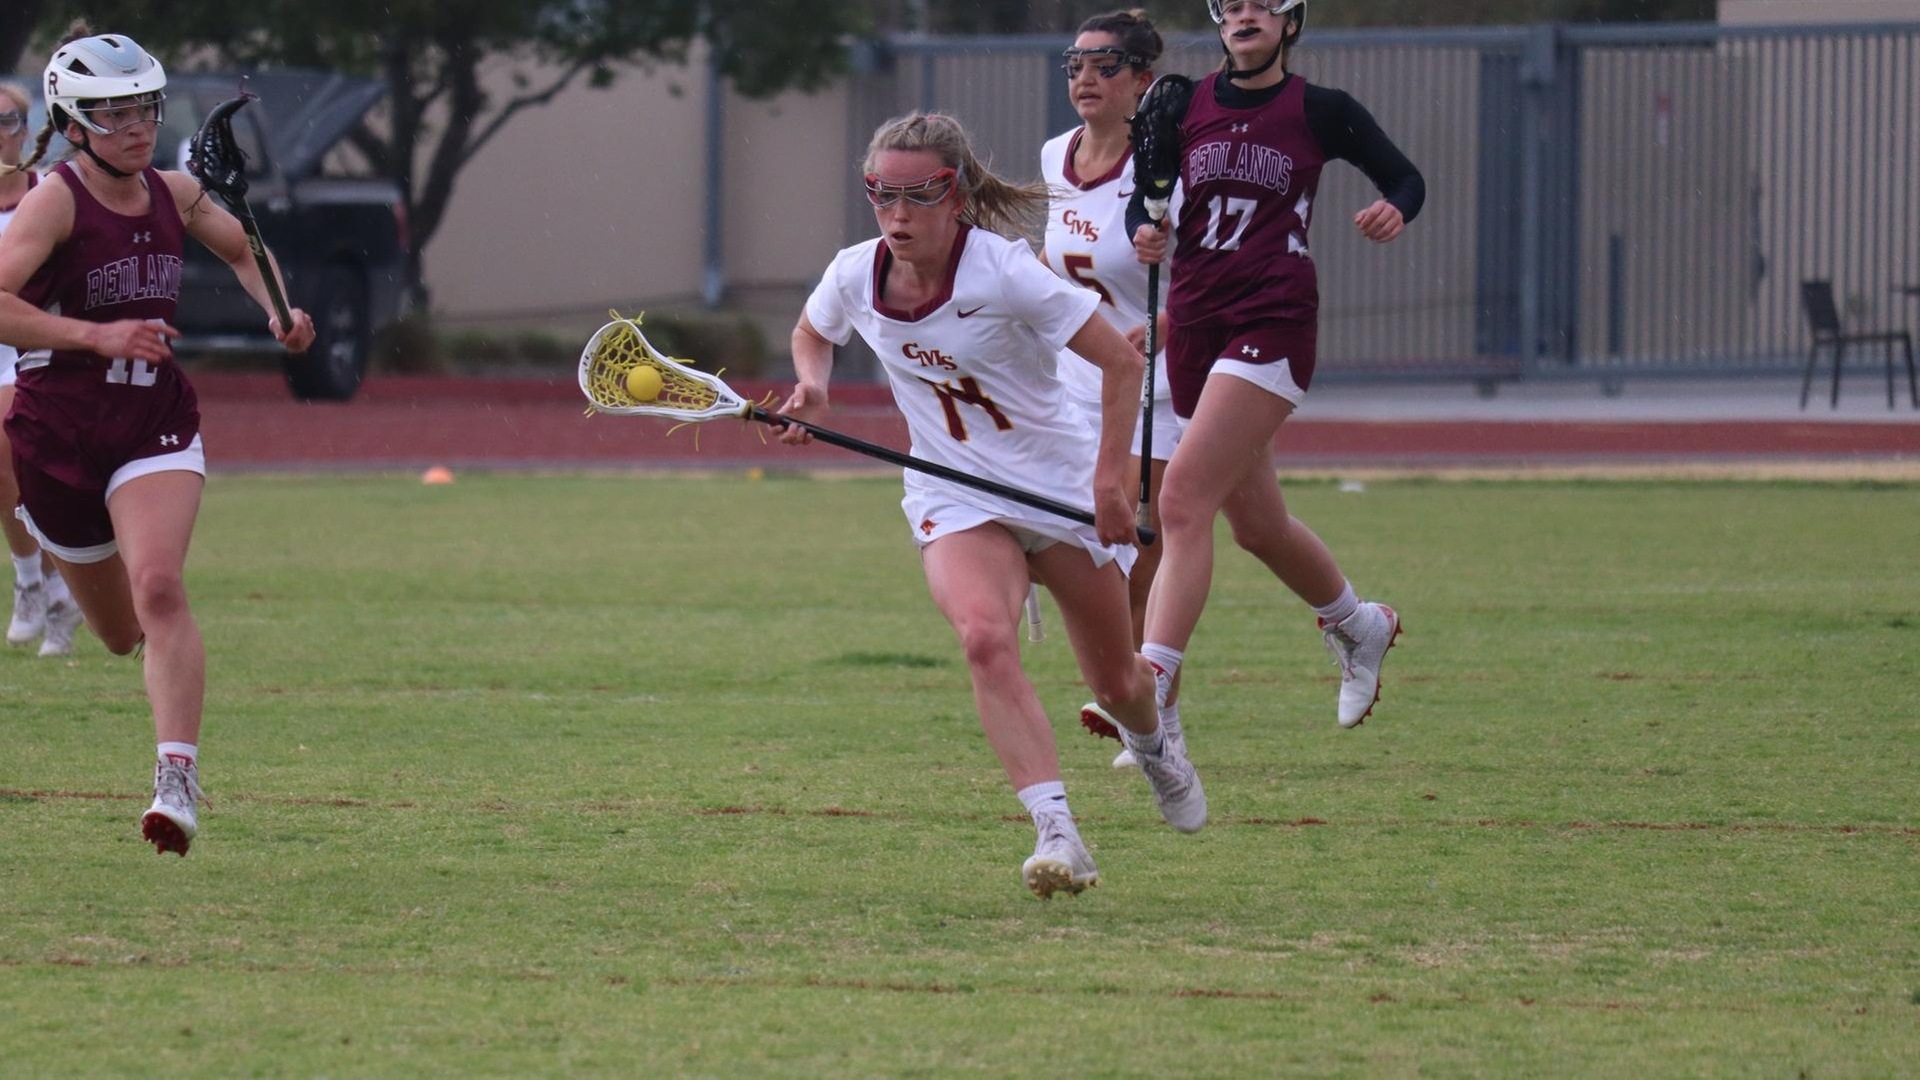 Olivia Carey had two early goals for the Athenas (photo by Caelyn Smith)